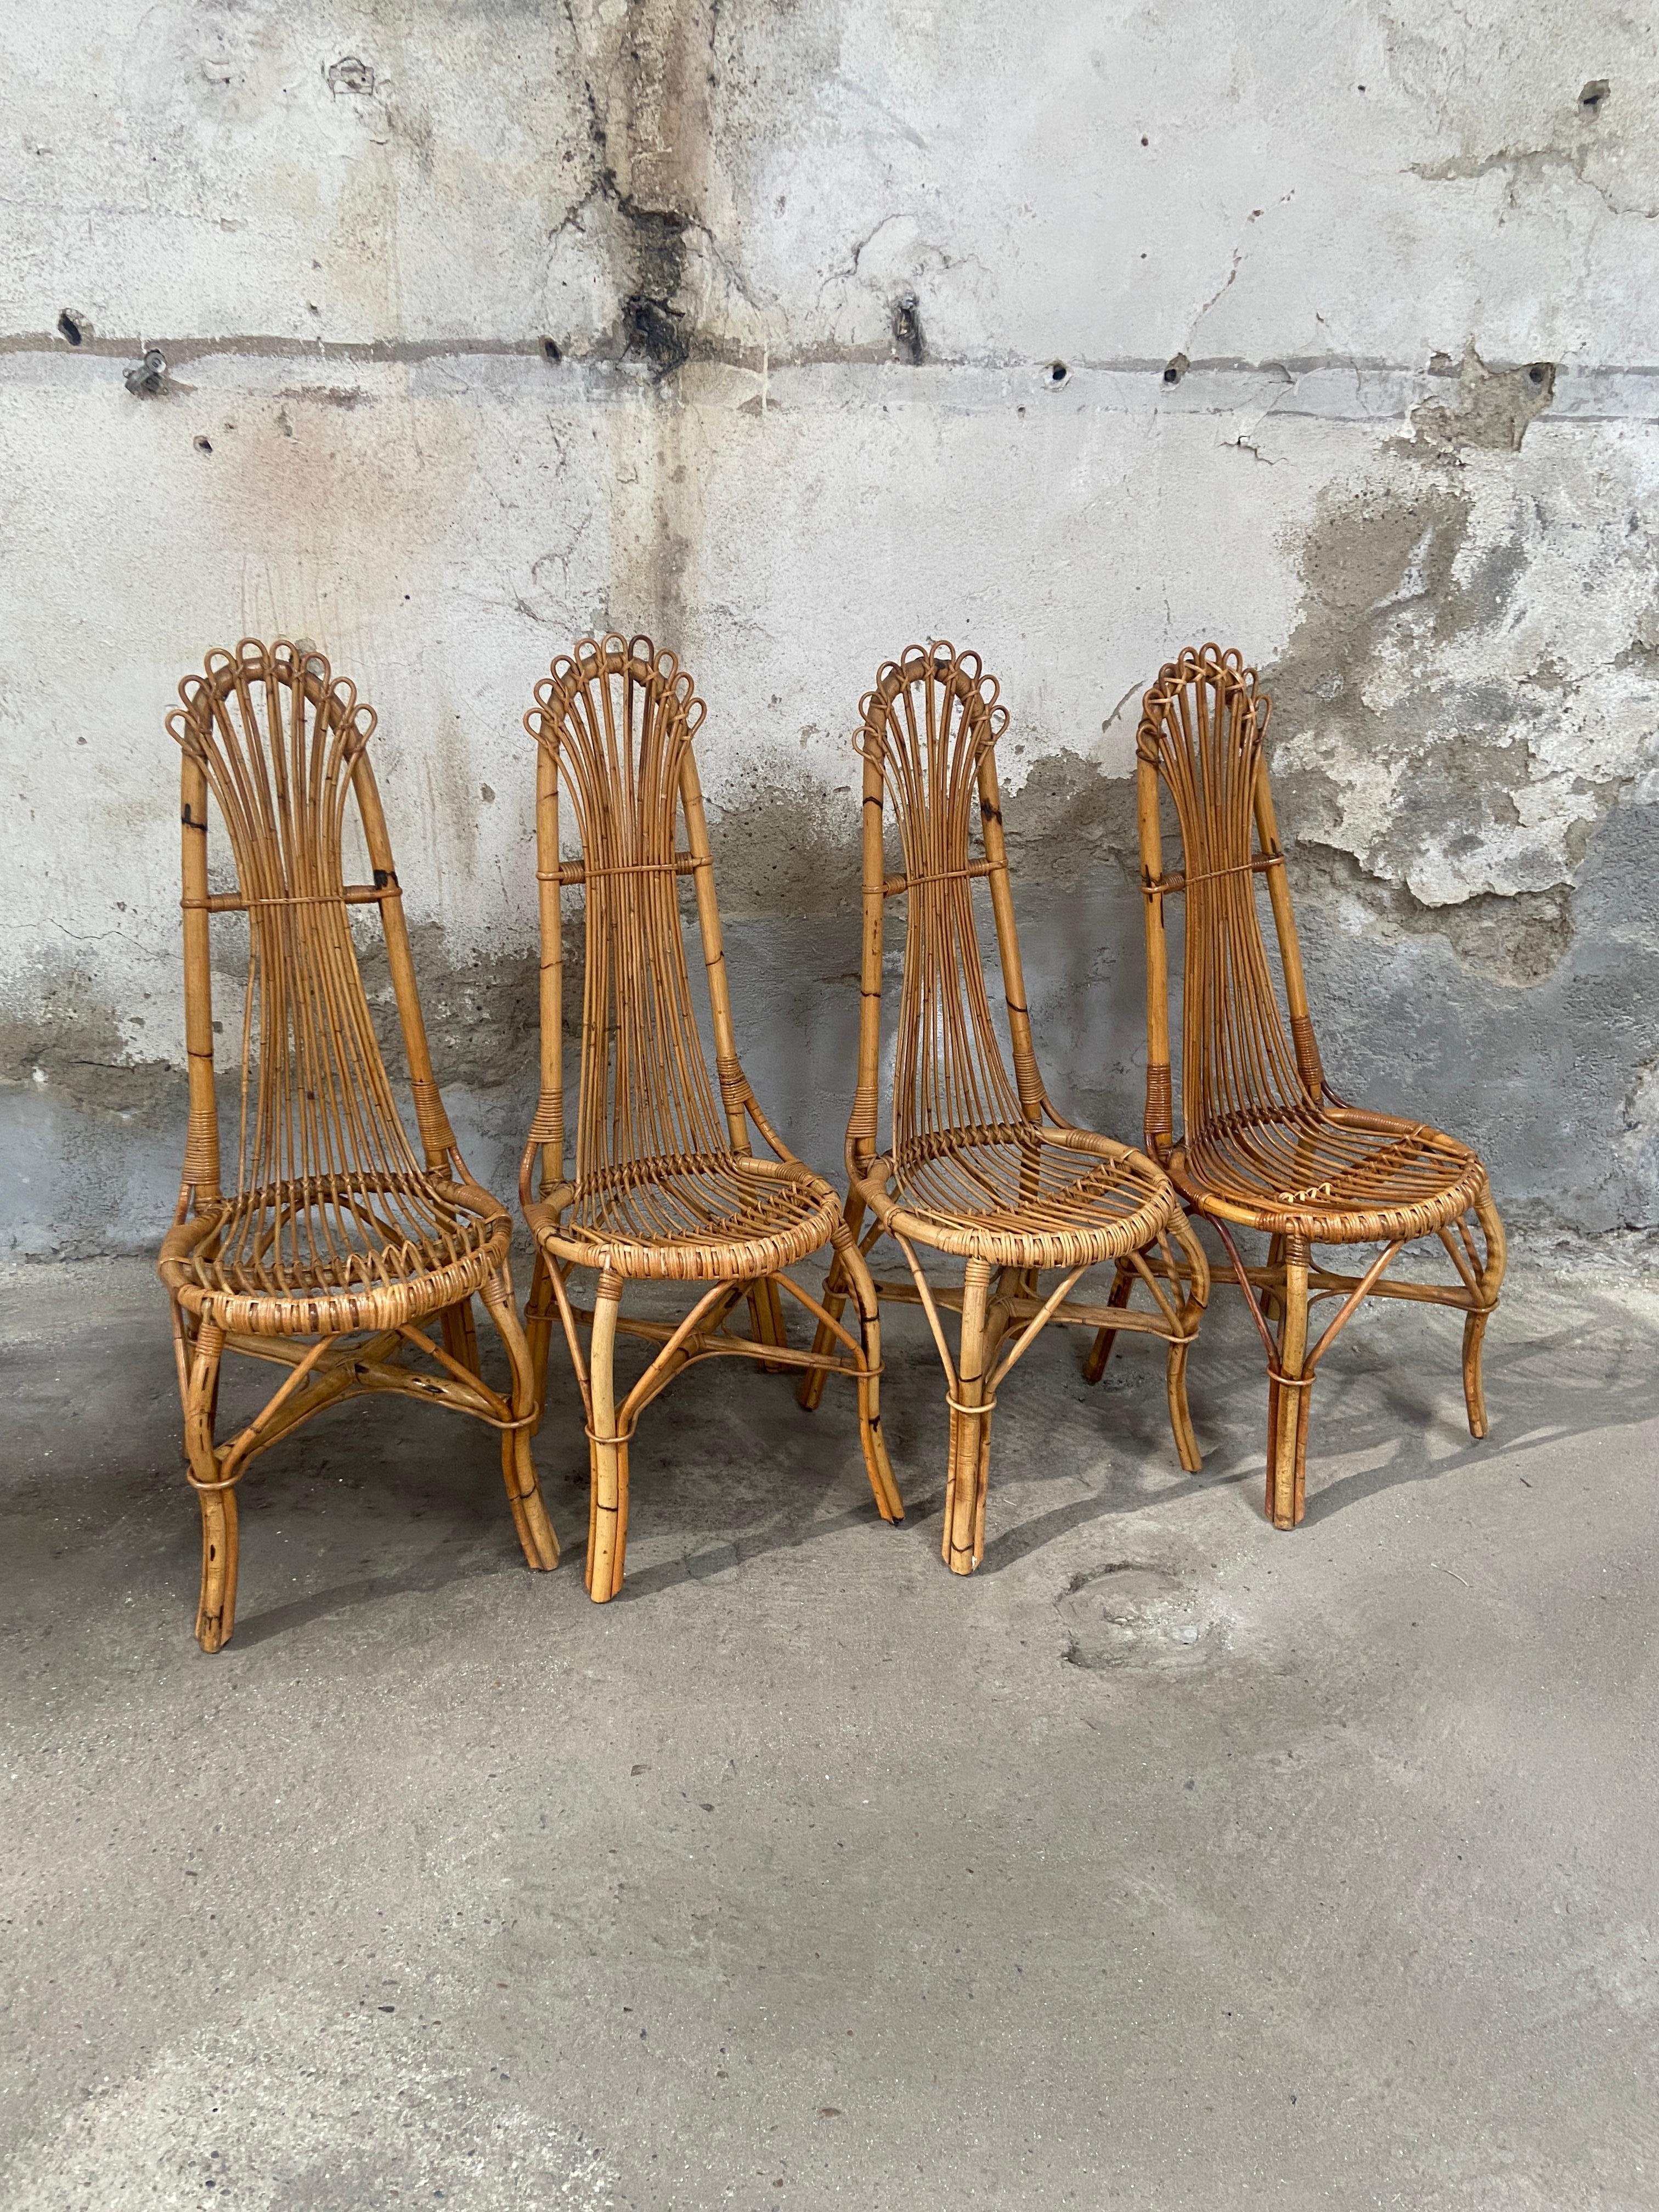 Mid-Century Modern Set of 4 Bamboo Chairs from the French Riviera. The Chairs are in really good vintage condition with a beautiful patina due to age and use.